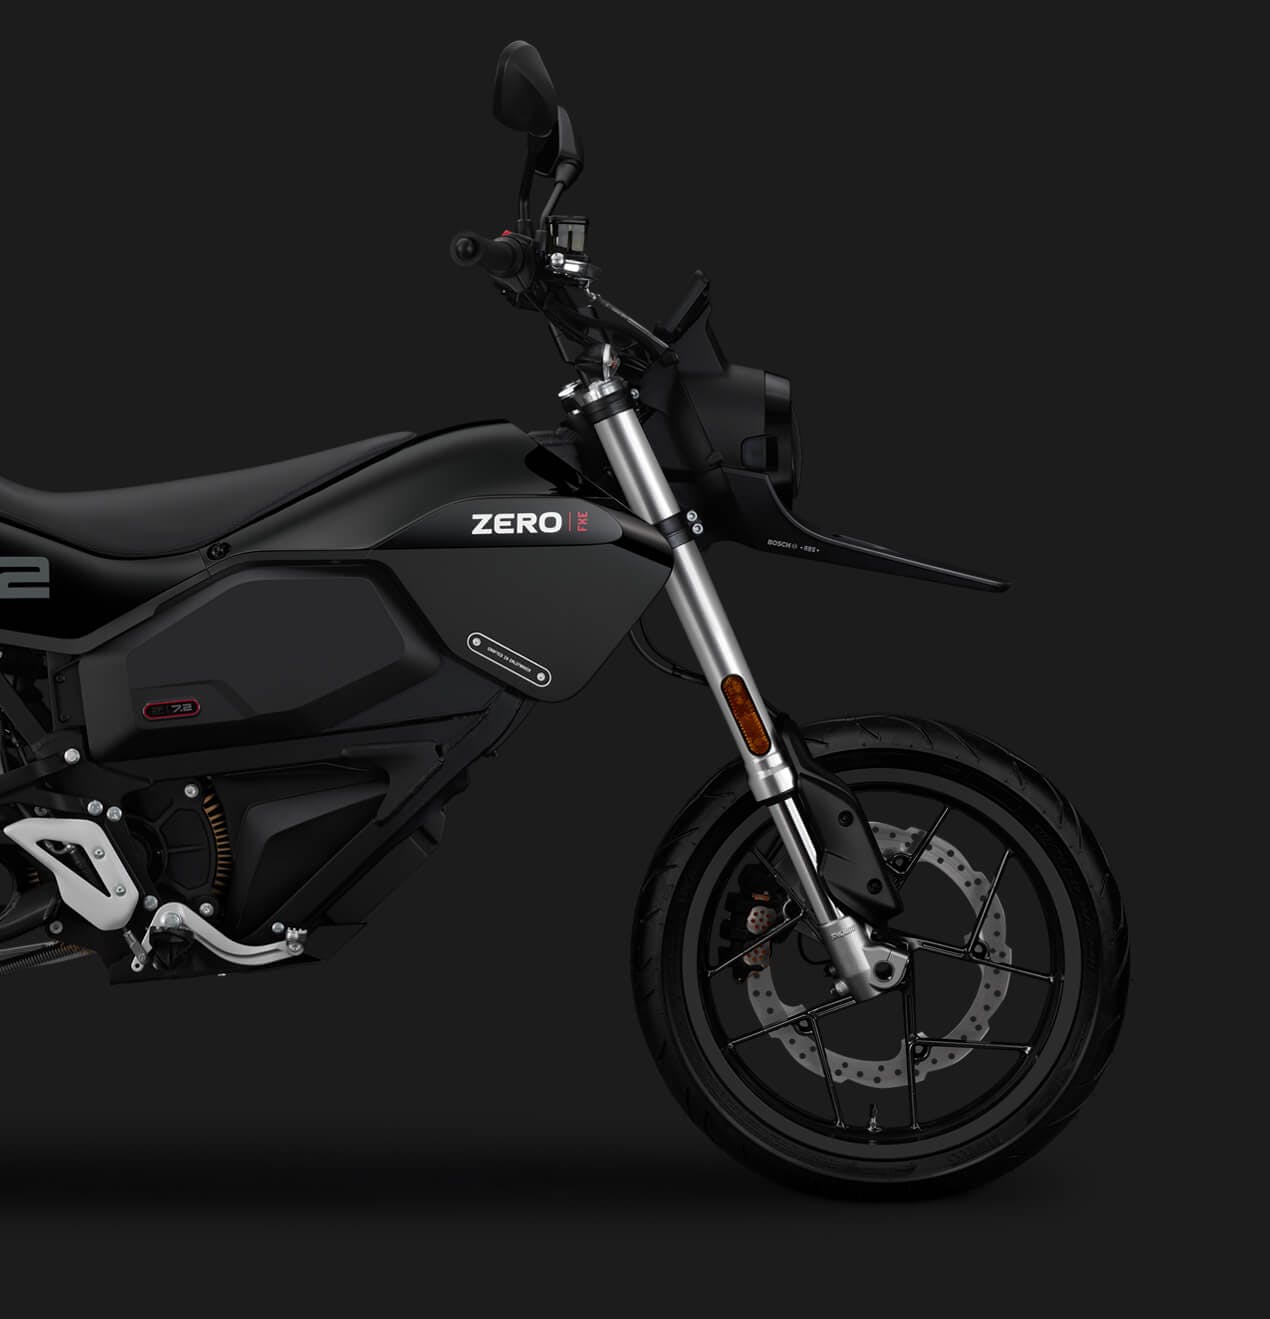 https://e-vehicleinfo.com/global/zero-fxe-electric-motorcycle-price-range-and-specifications/